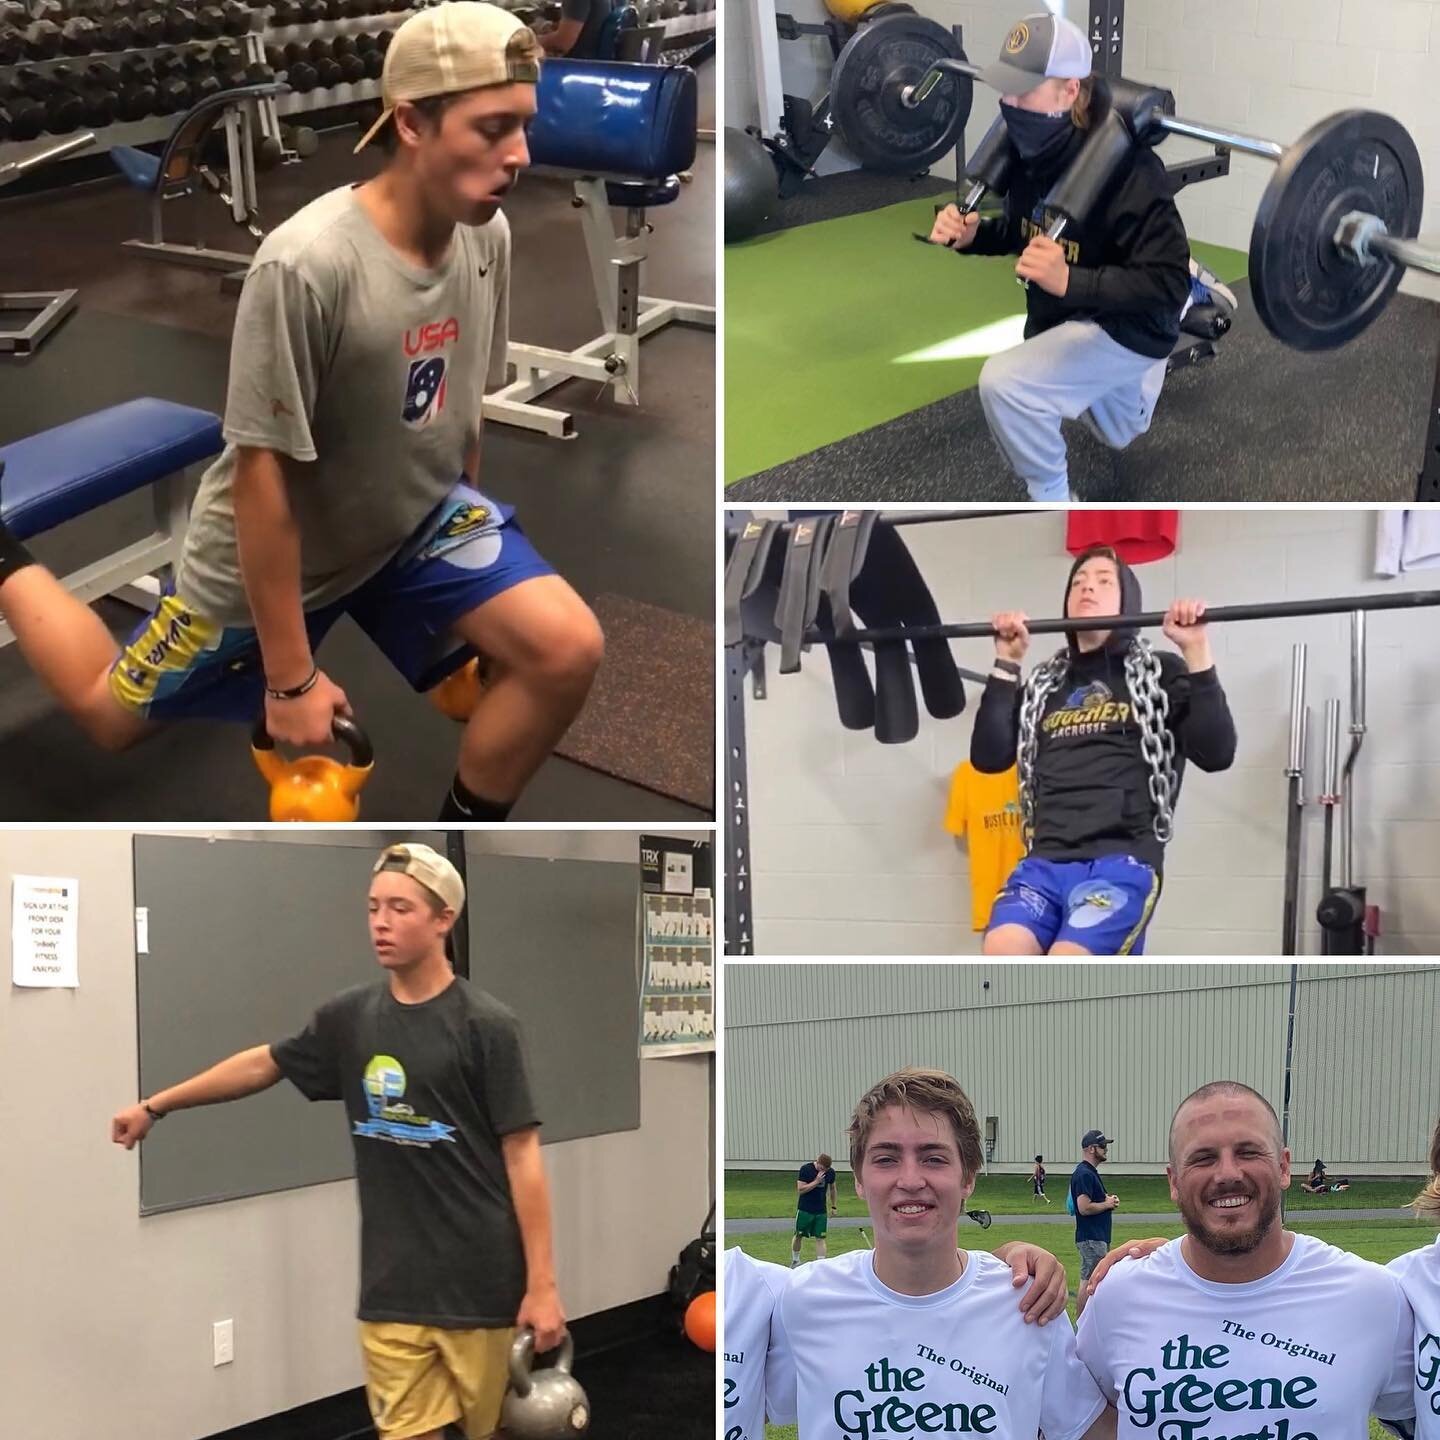 In case you missed it, this week&rsquo;s &ldquo;Hard Work Pays Off Client Spotlight&rdquo; in the blog was Dylan White. Dylan was my second athlete I ever trained back in 2018. Since then, he&rsquo;s gotten his license, I started my own brand, he got